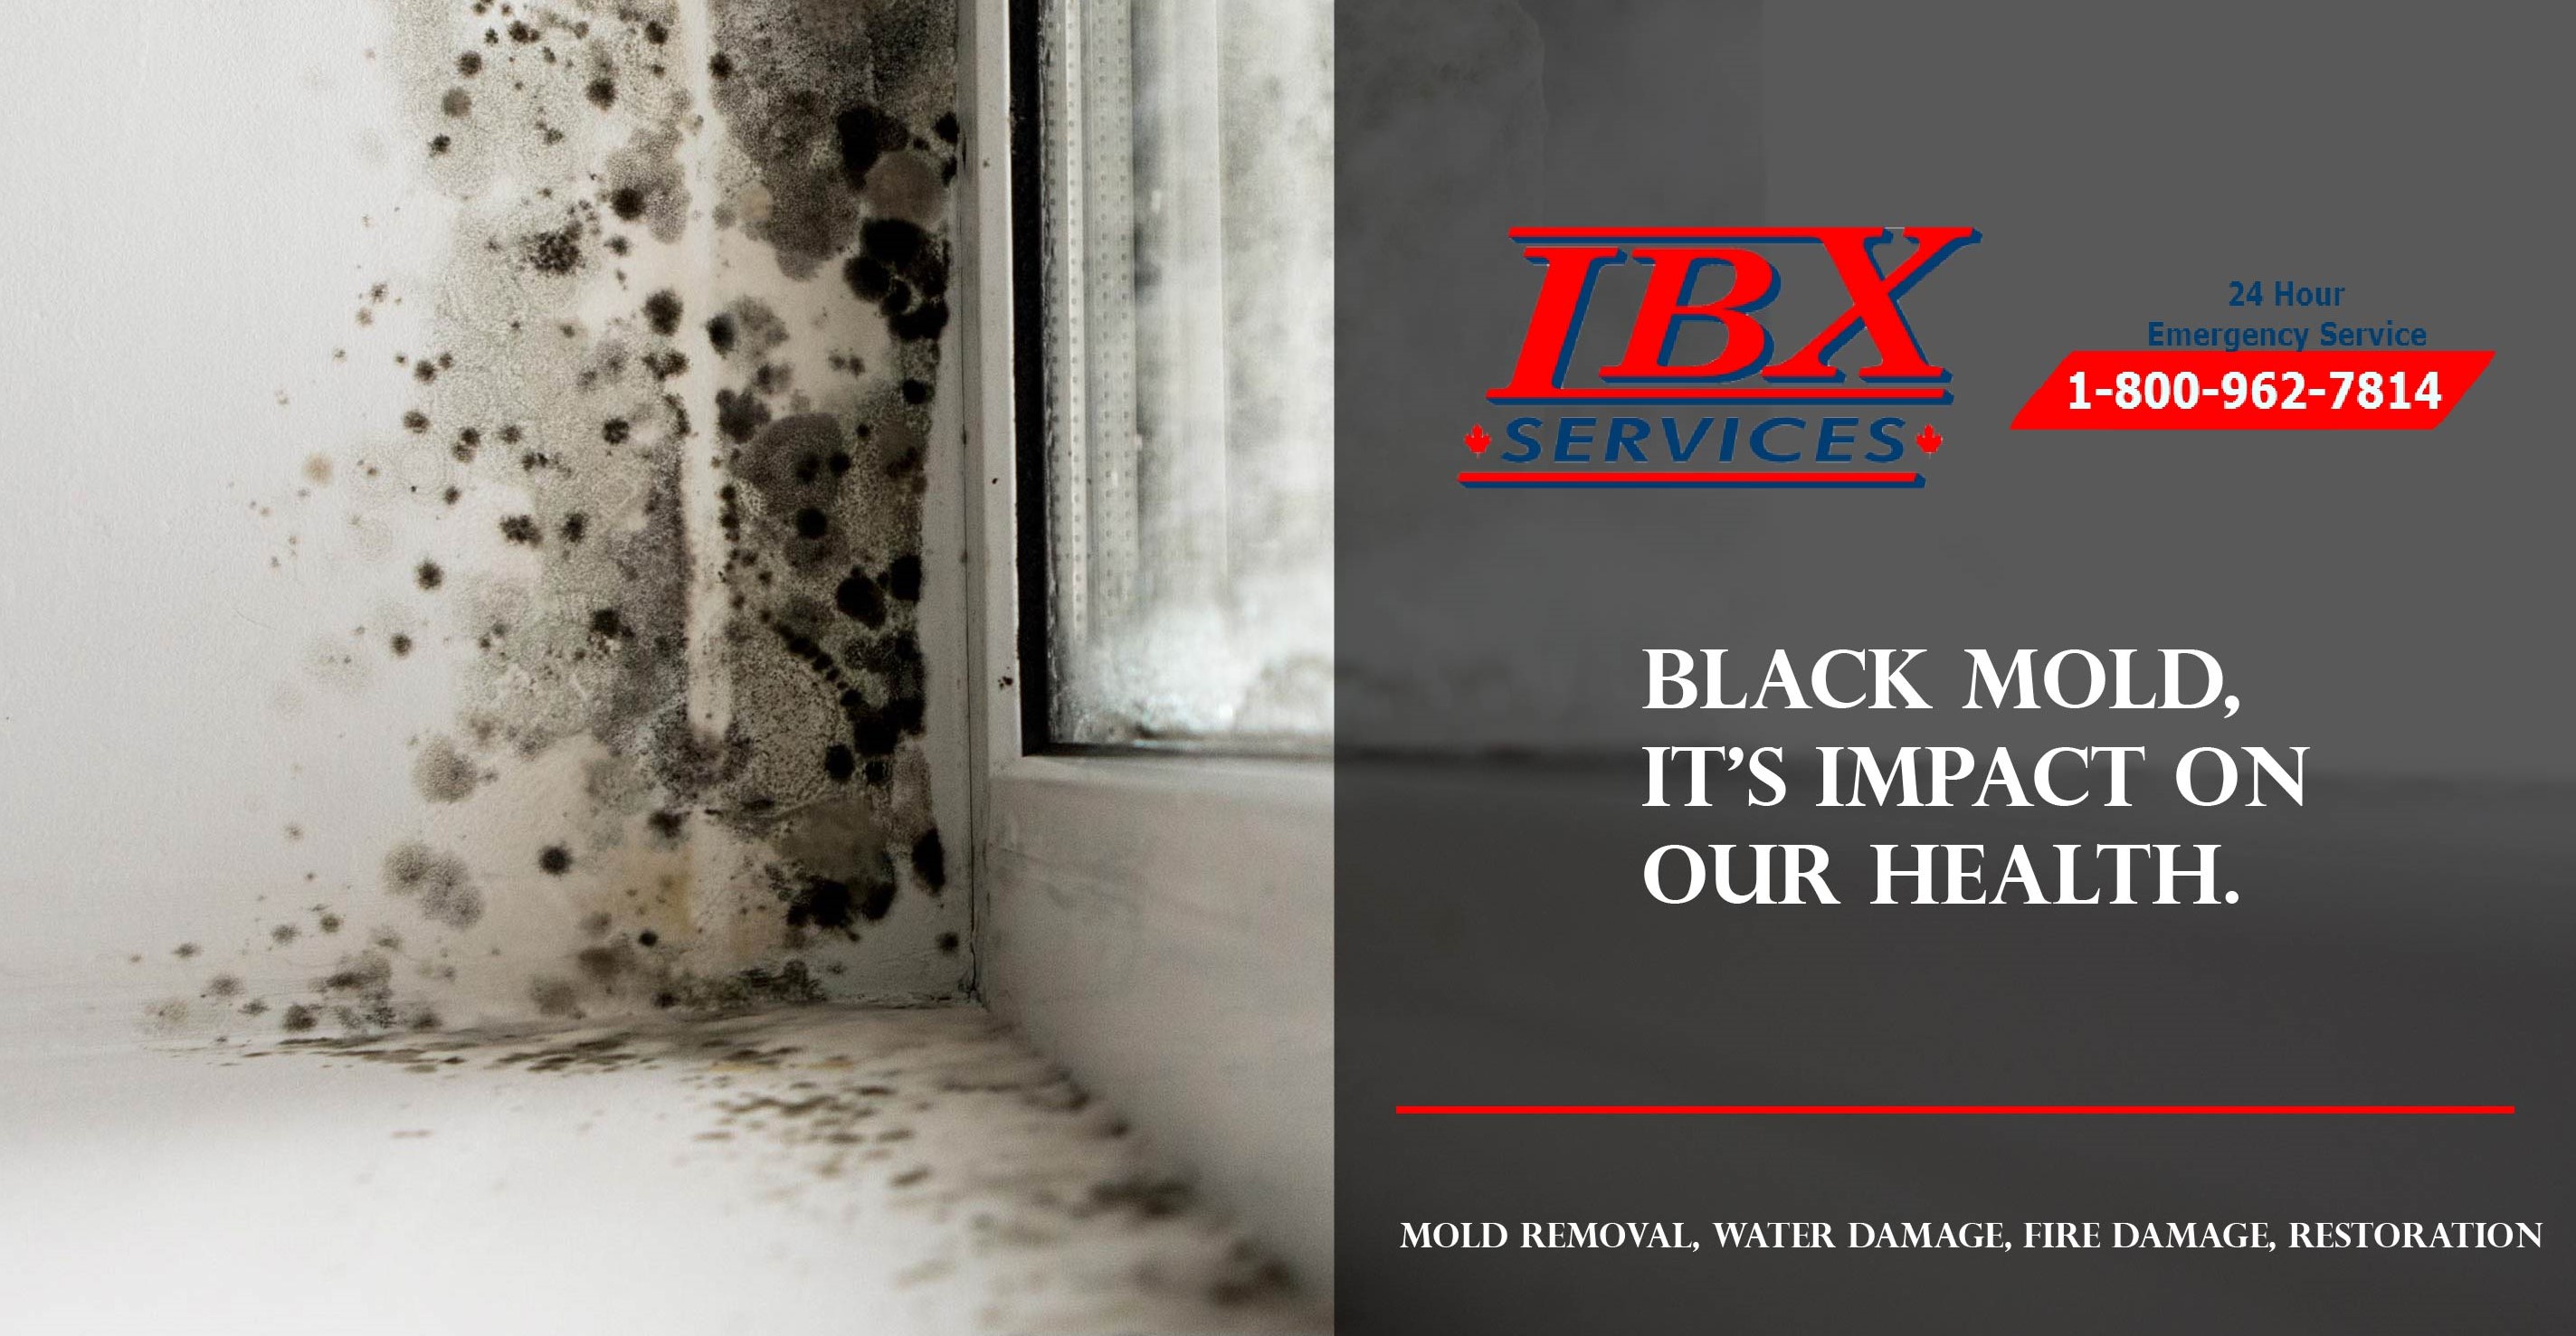 Black Mold, It’s Impact On Our Health